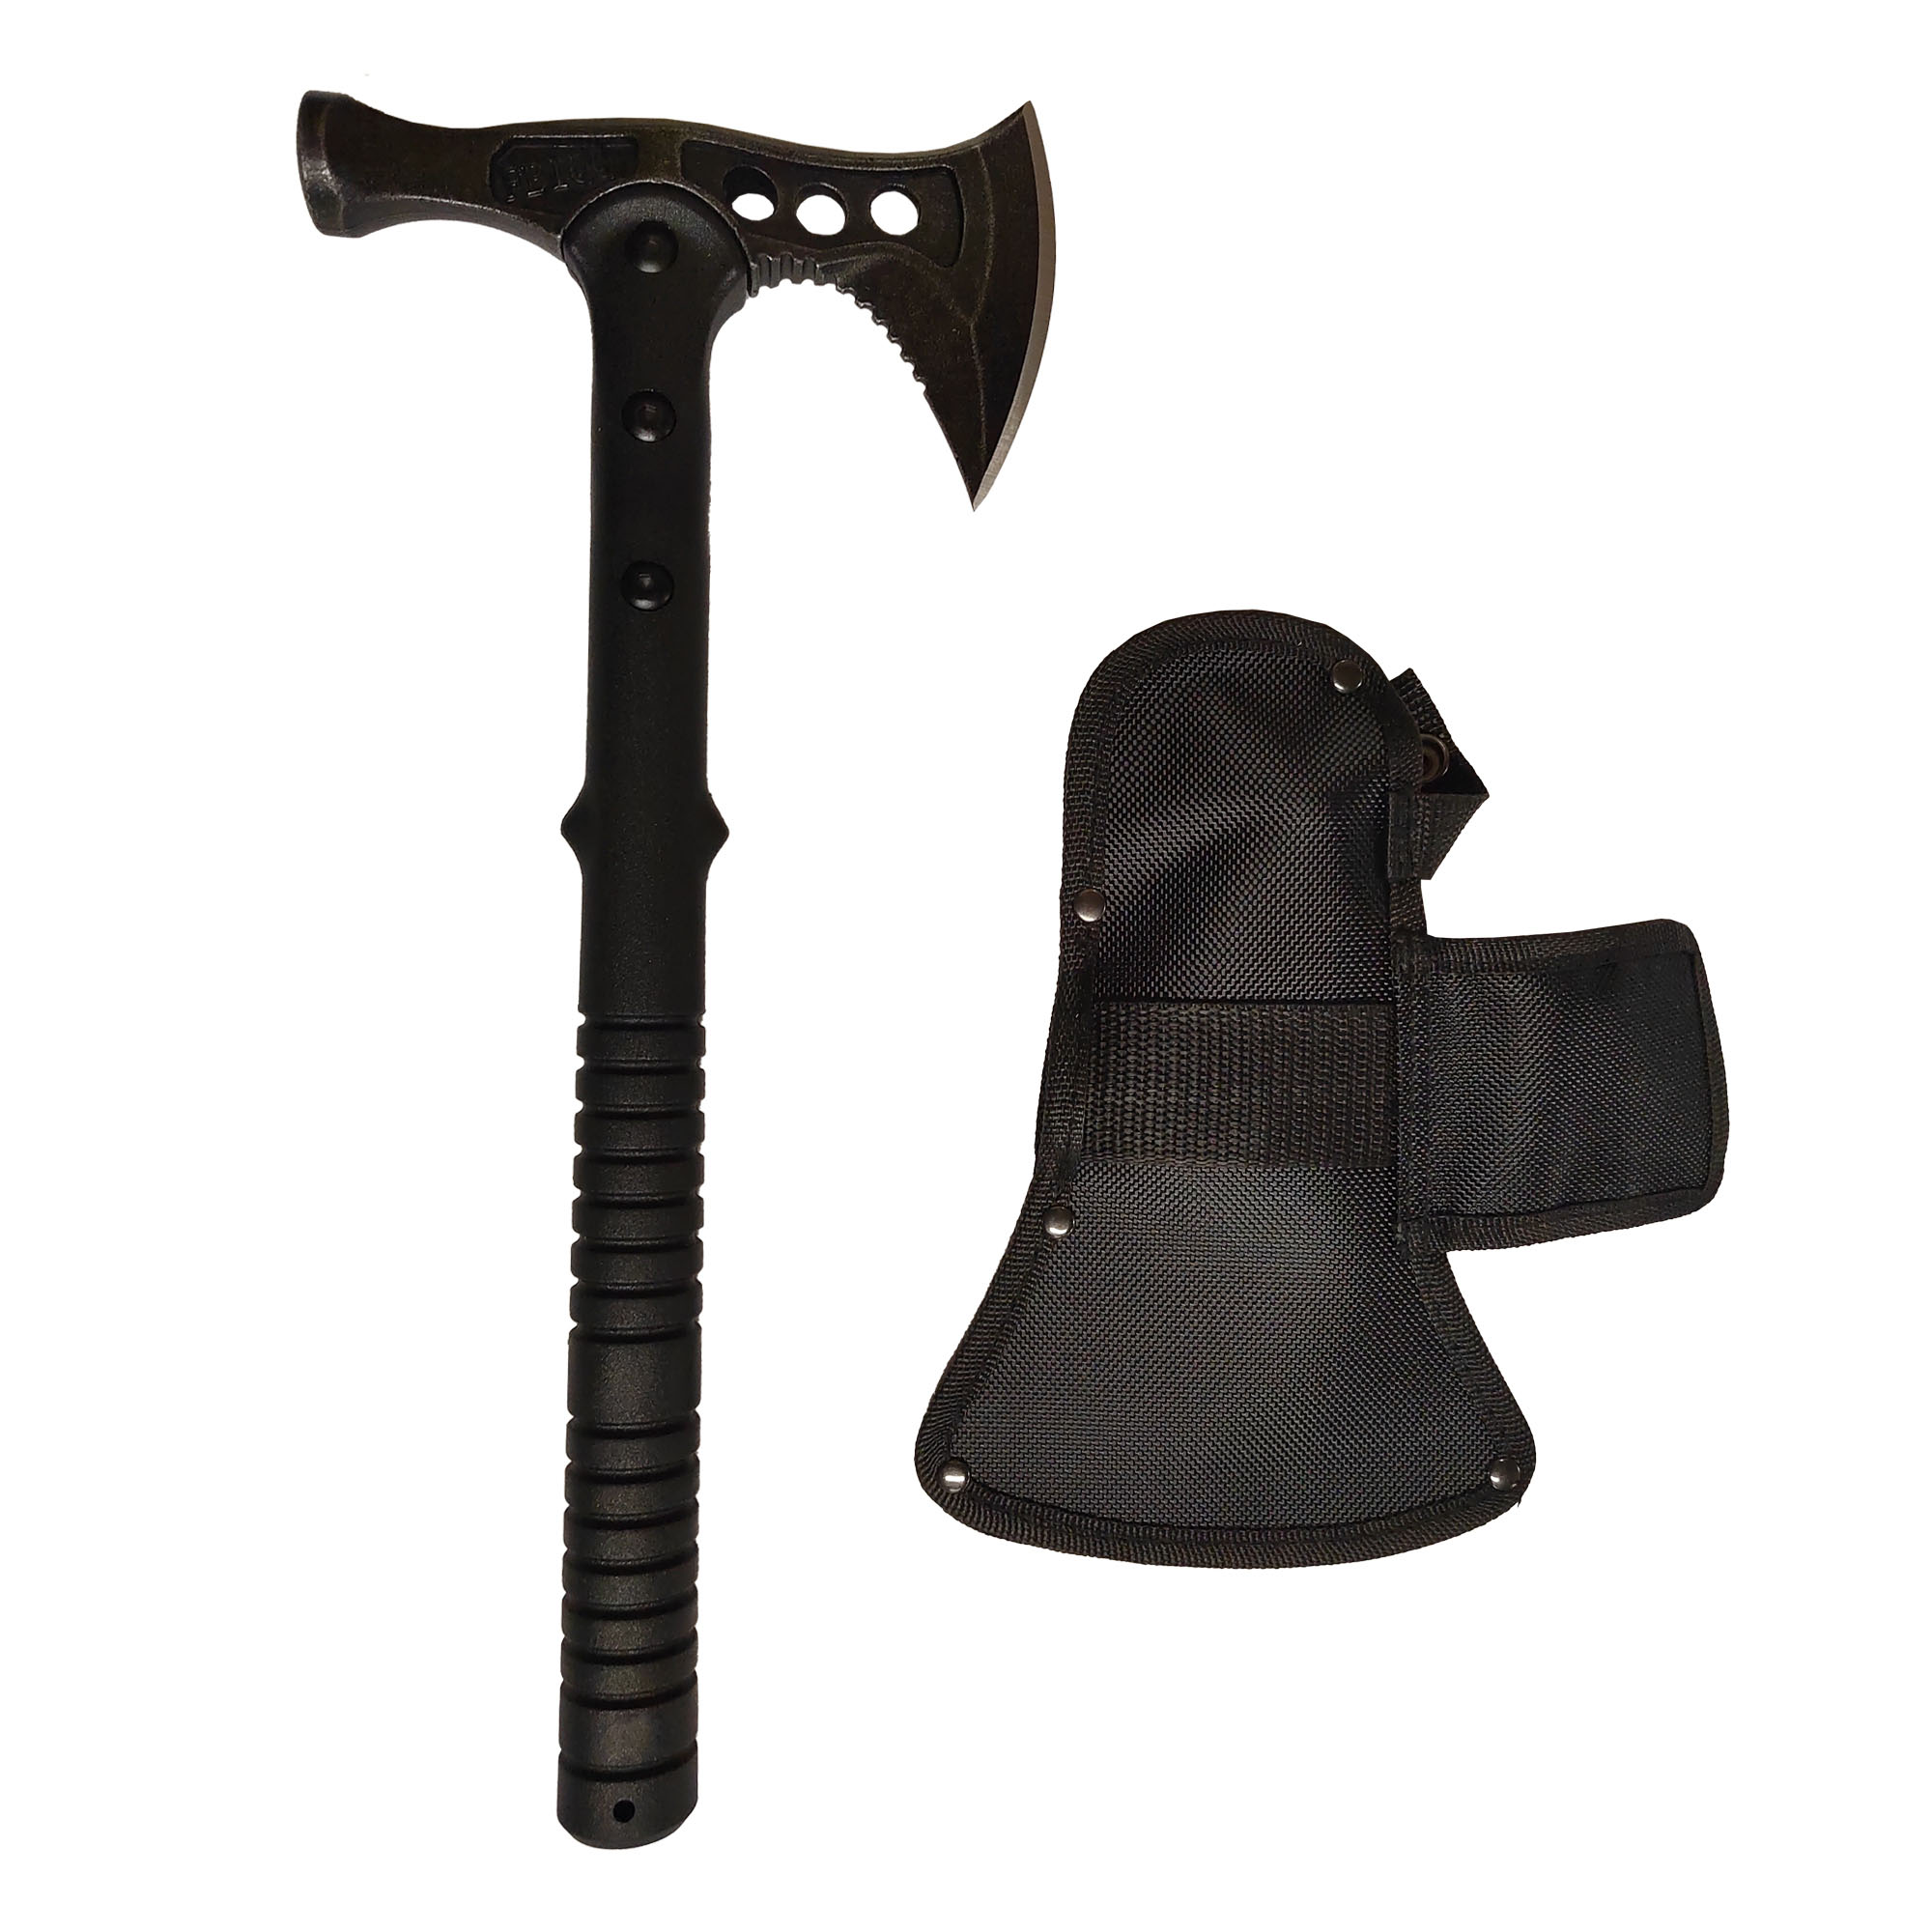 Outdoor axe with hammer head and scabbard